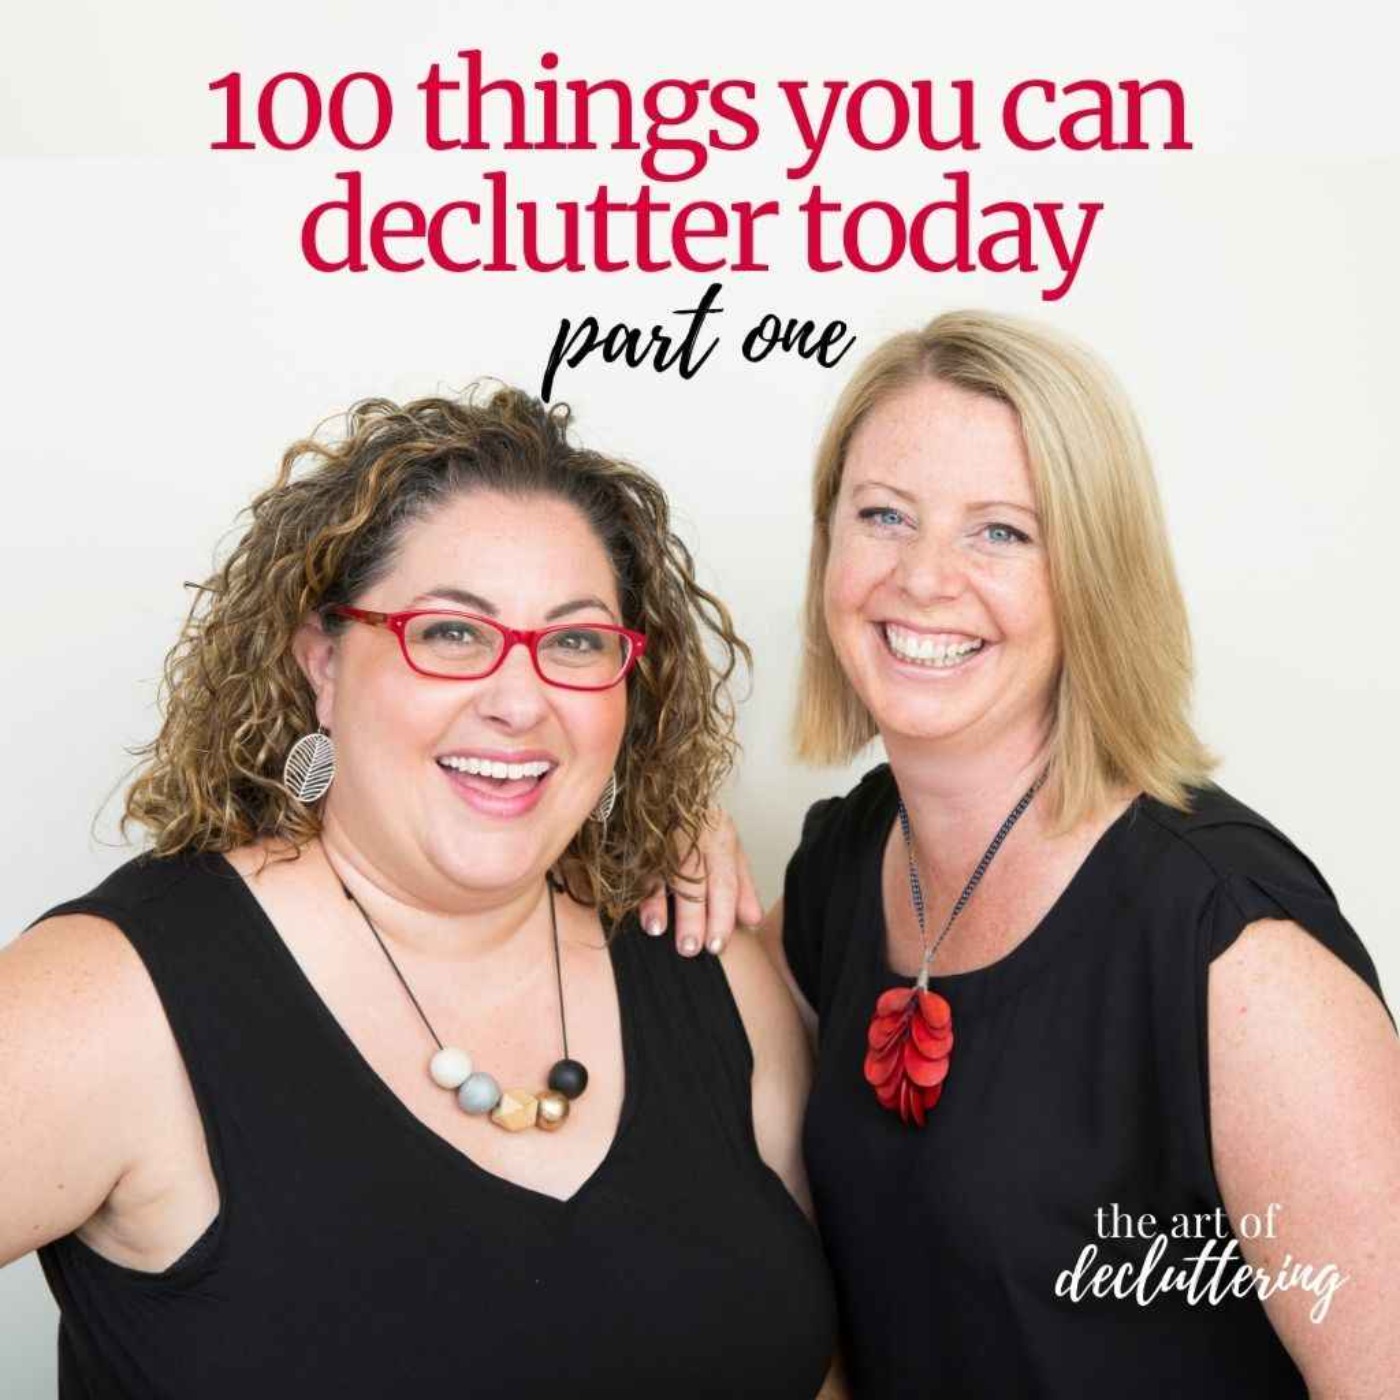 100 things you can declutter today - Part 1